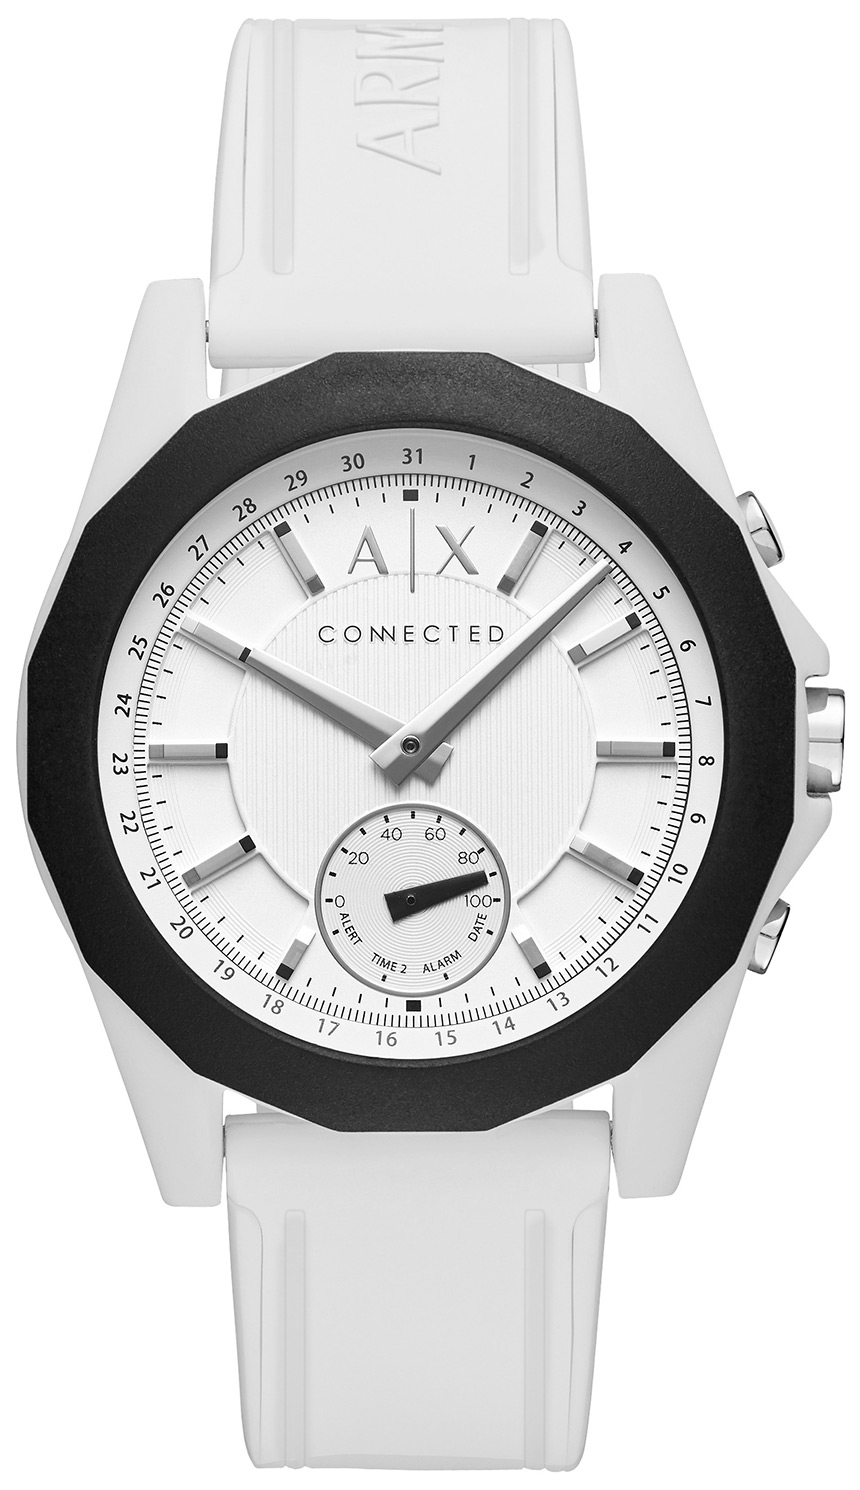 Armani Exchange AX Connected Watch | aBlogtoWatch